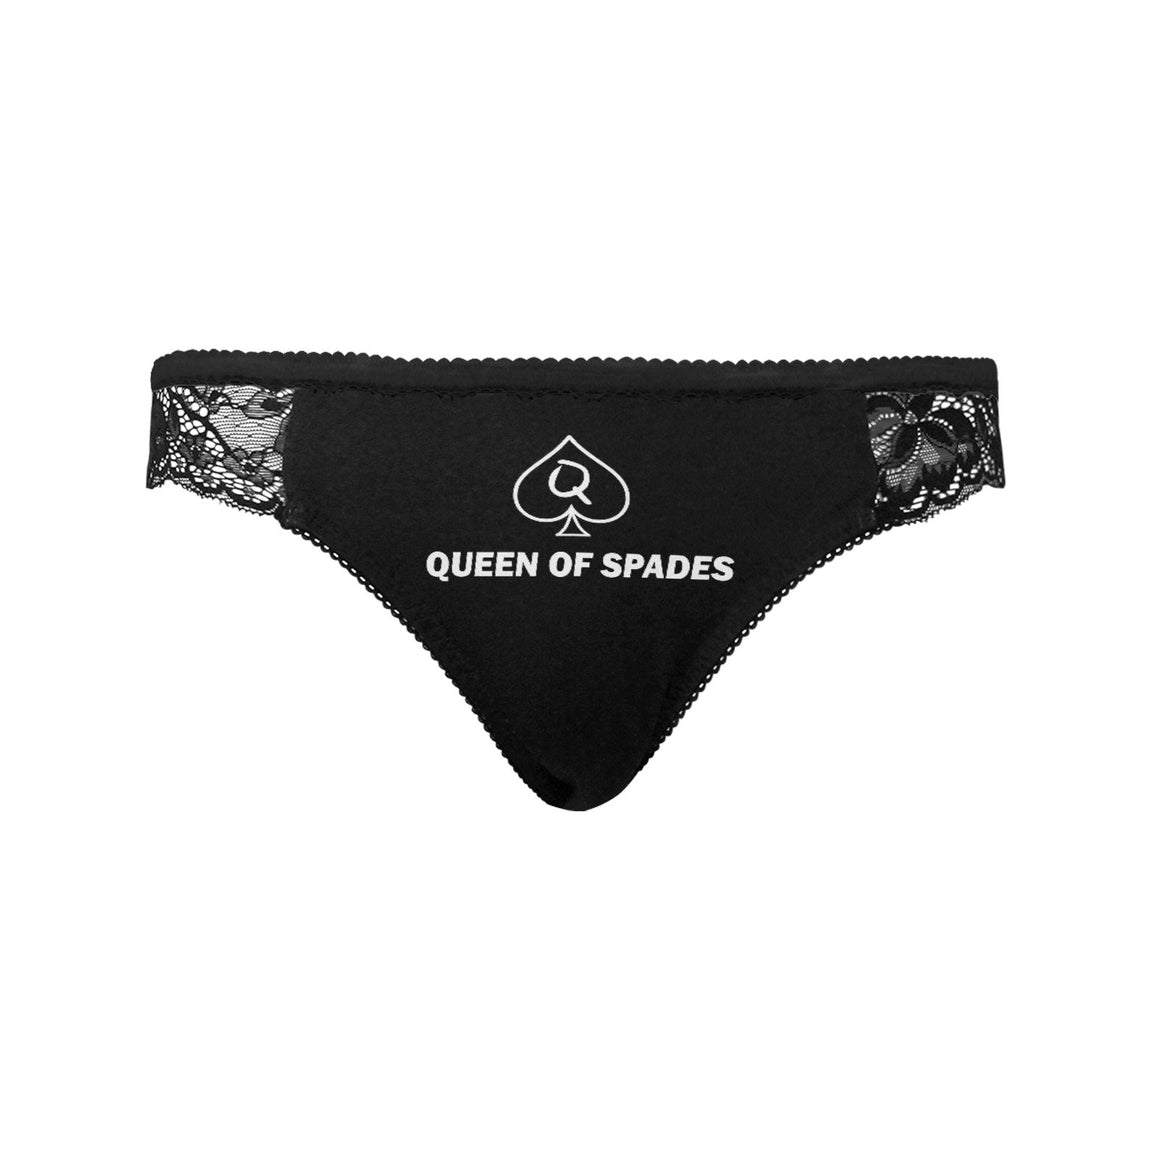 Queen Of Spades BBC Lace Underwear QOS Panties Sexy PAWG Knickers Big Black Cock Lover, bbc only slut Big Black Dick Addict slutty gag gift